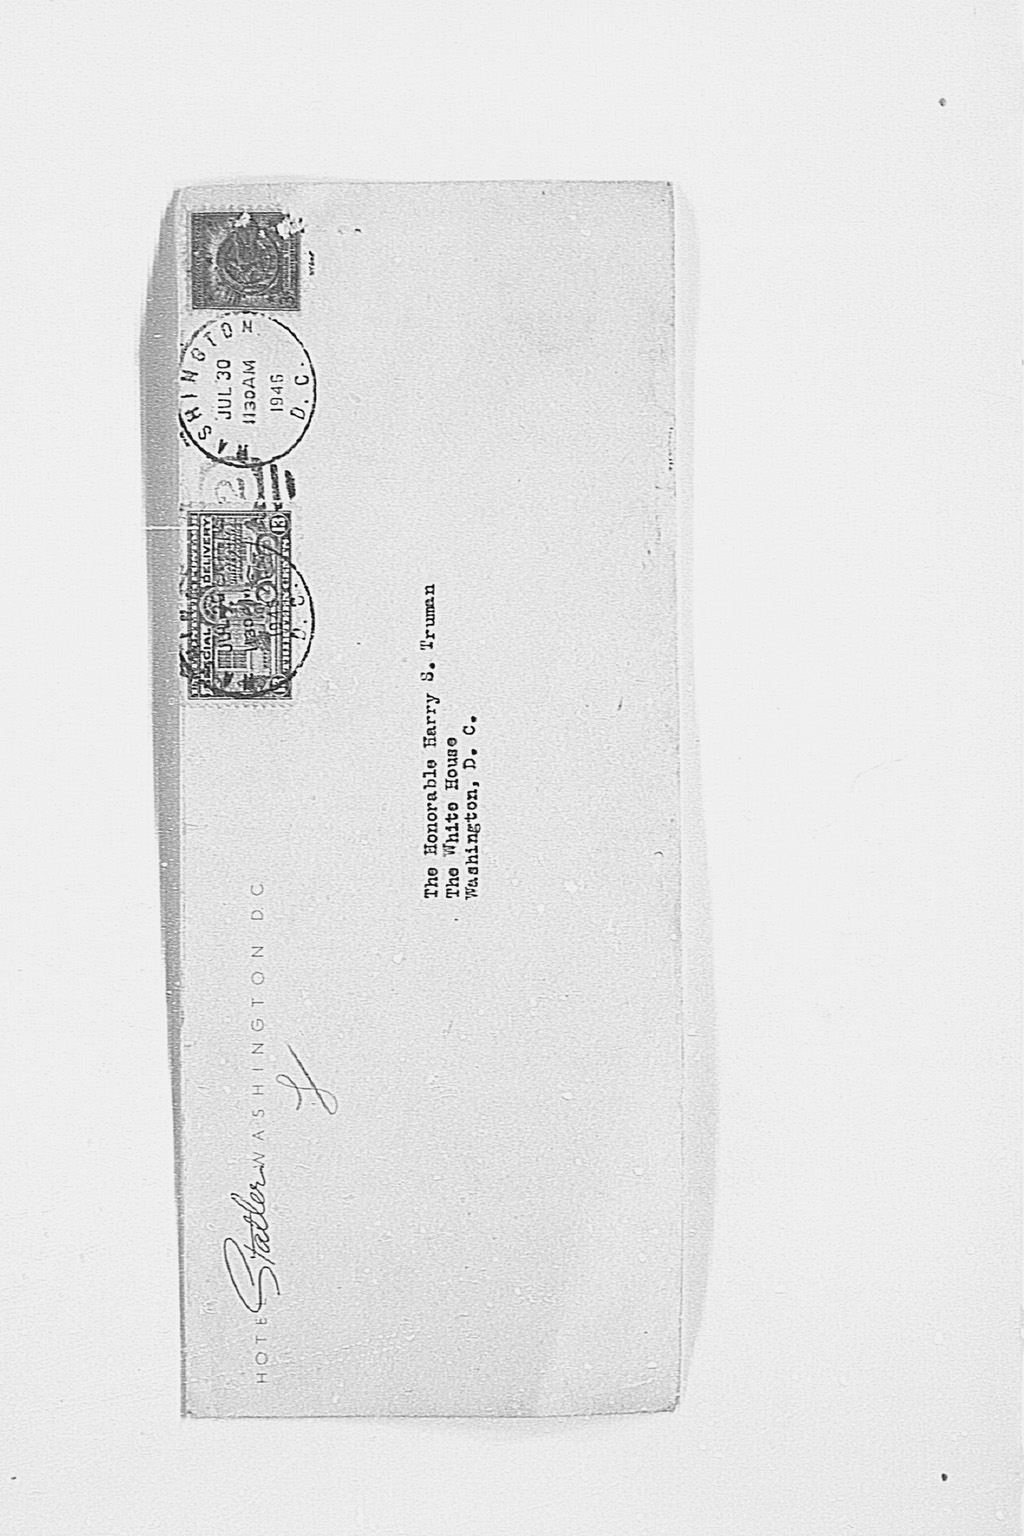 [Letter from Kenneth Colegrove to President Harry S. Truman, dated July 29, 1946](Larger image)